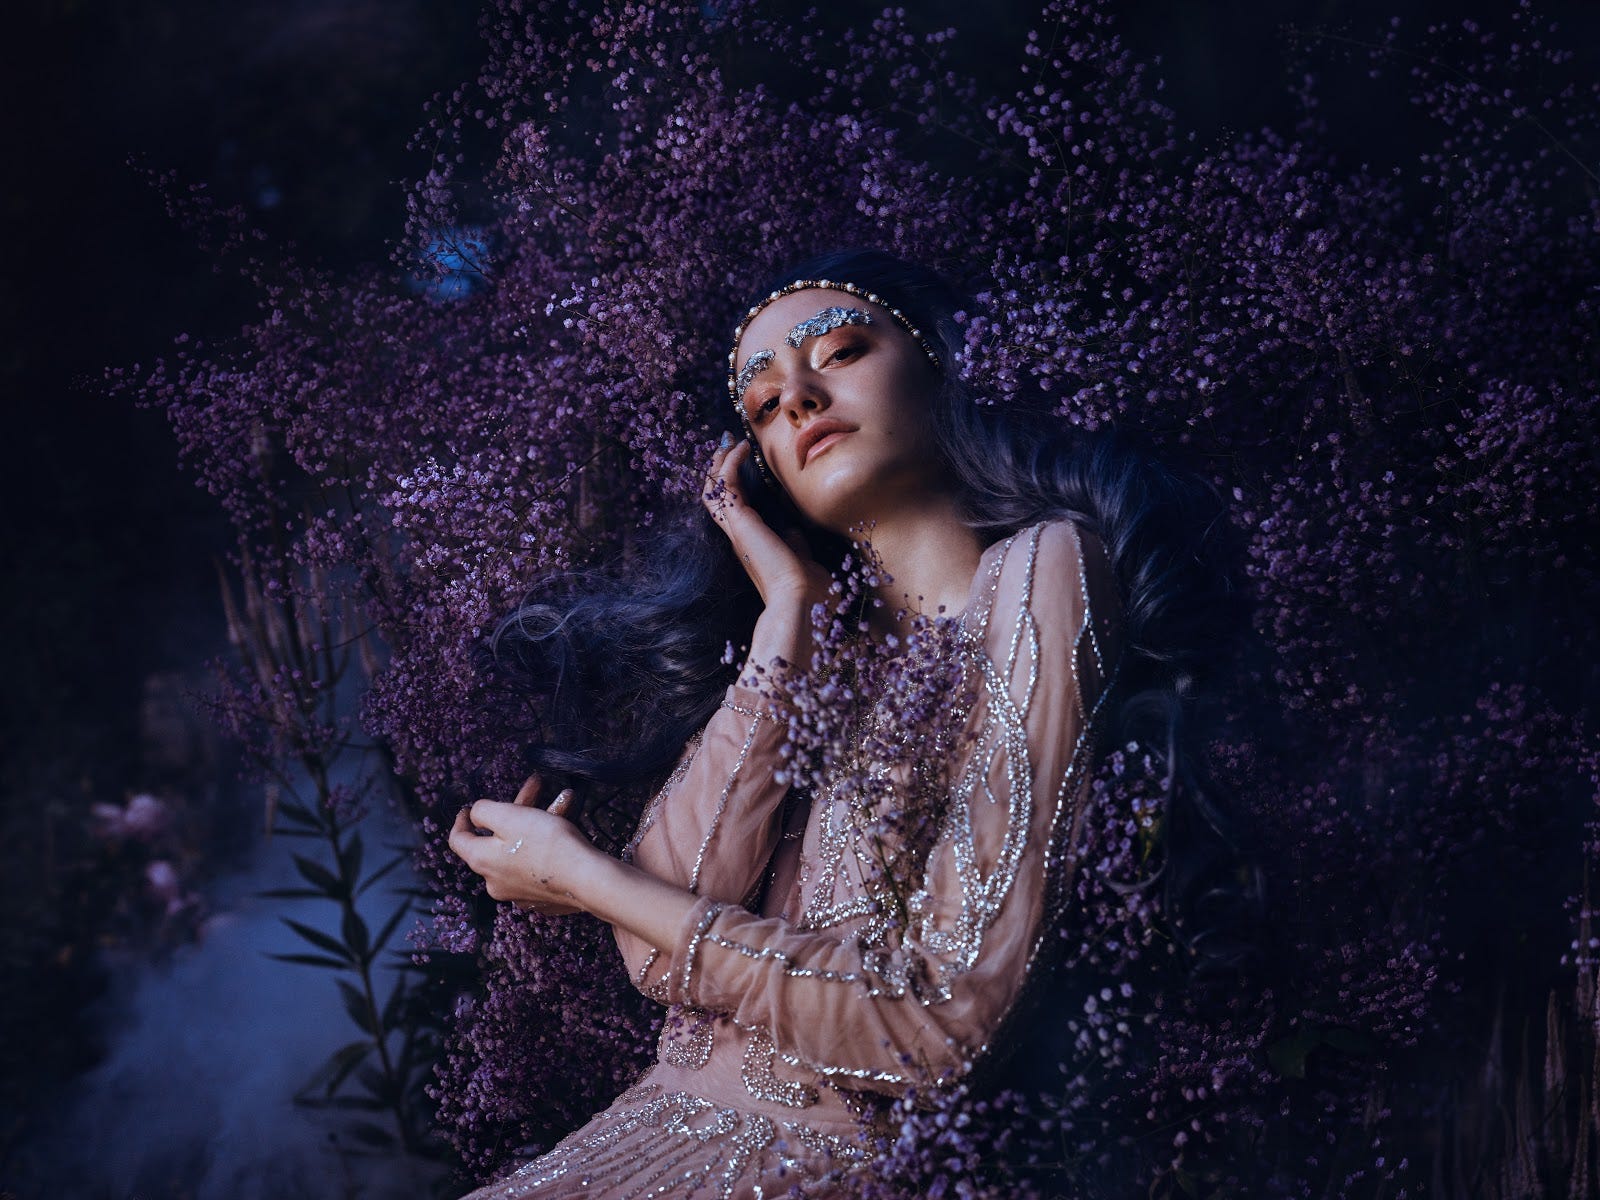 A fashionable young woman posing amid a background of lavendar flowers.